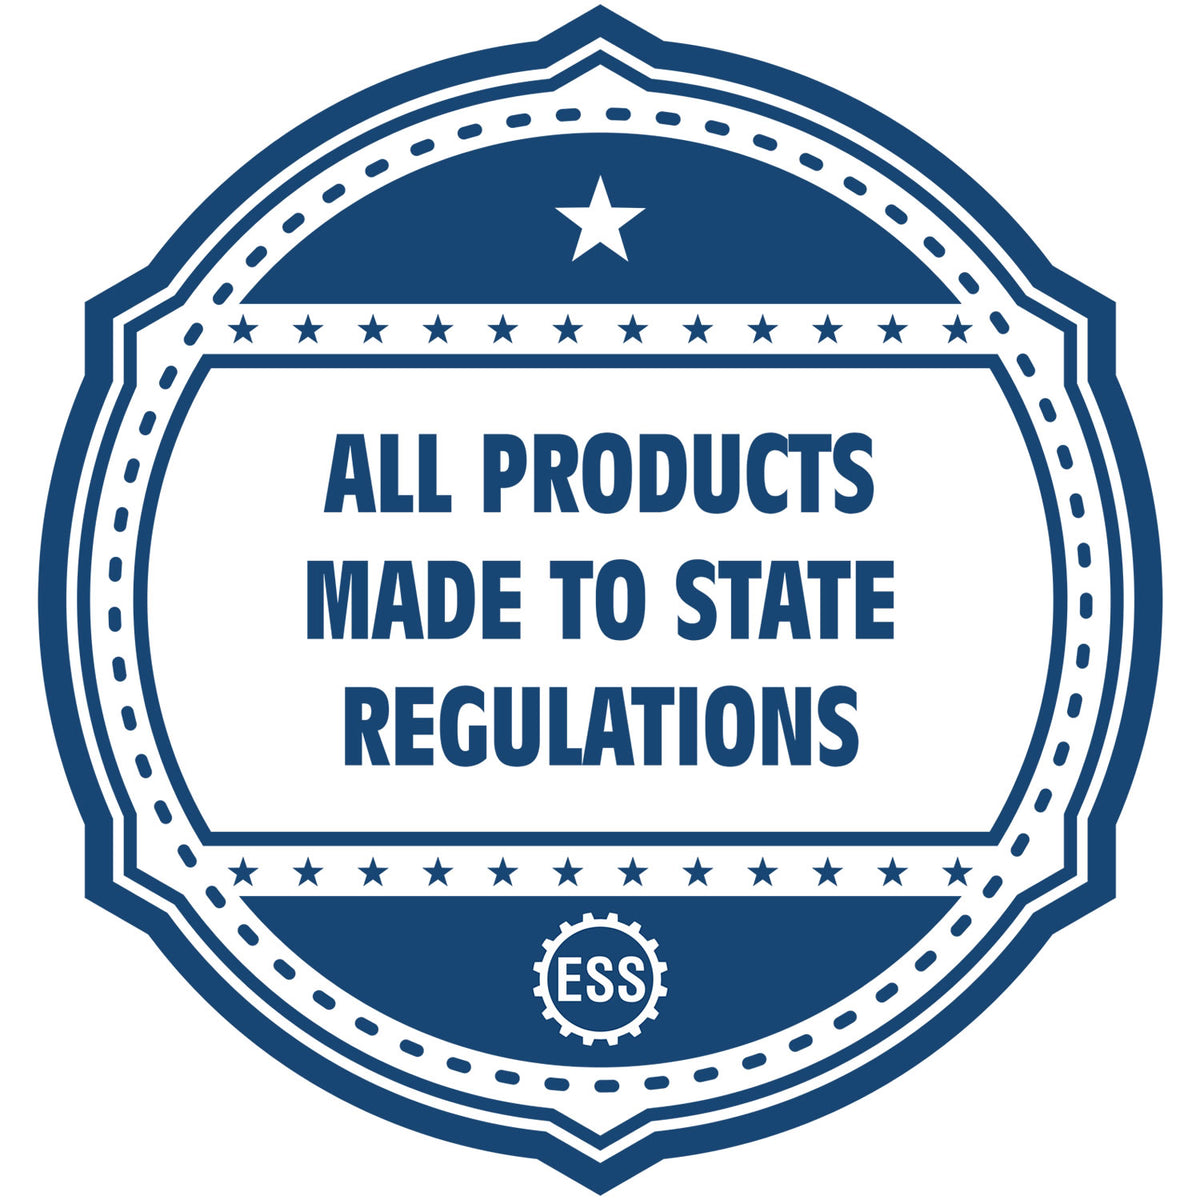 An icon or badge element for the Slim Pre-Inked North Dakota Architect Seal Stamp showing that this product is made in compliance with state regulations.